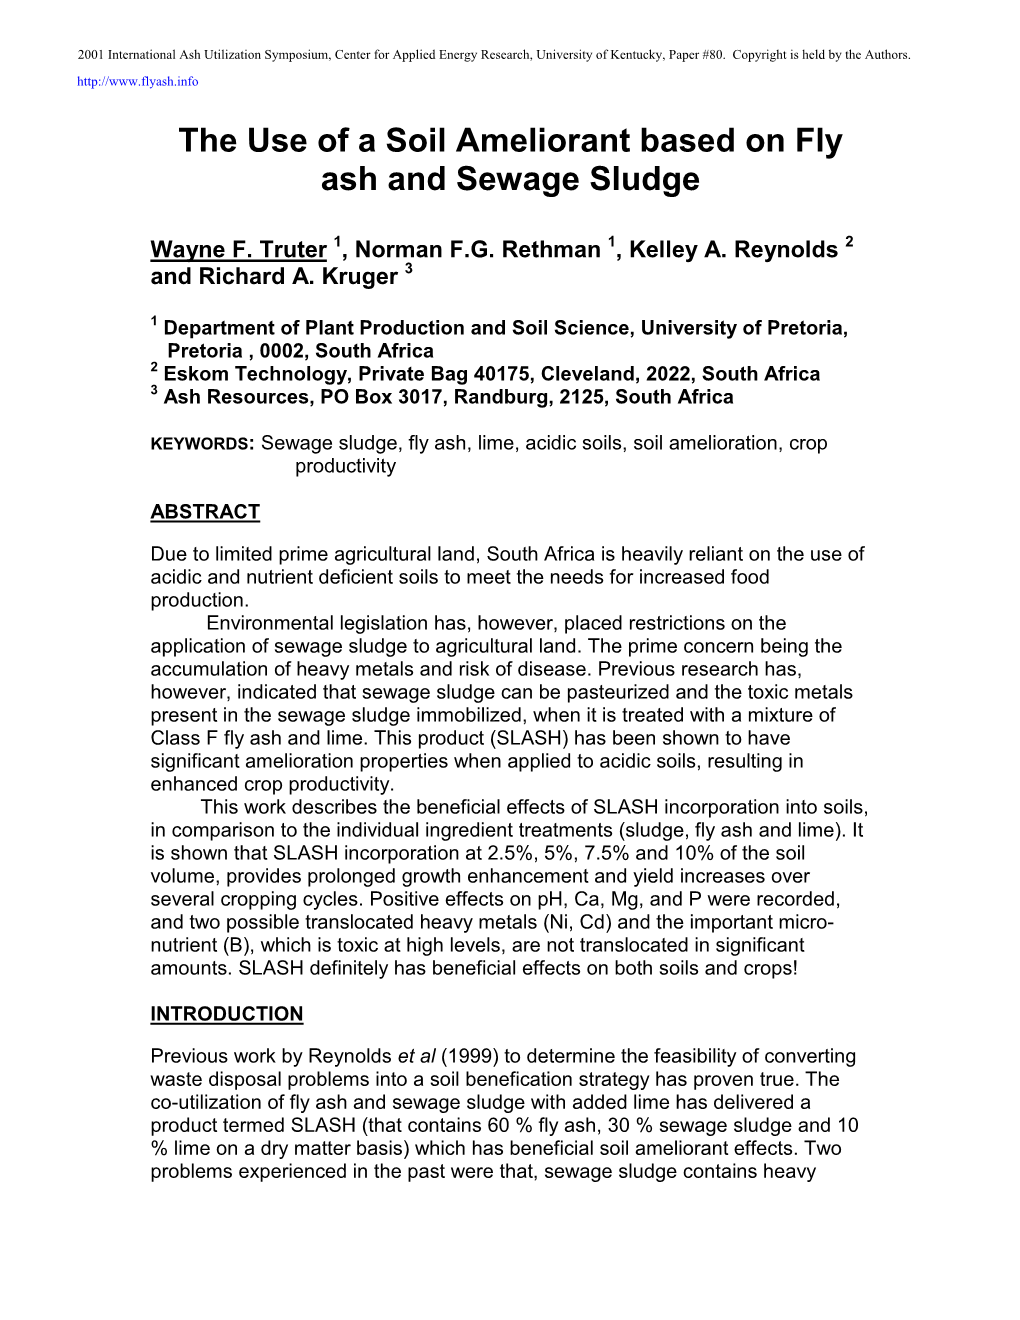 The Use of a Soil Ameliorant Based on Fly Ash and Sewage Sludge